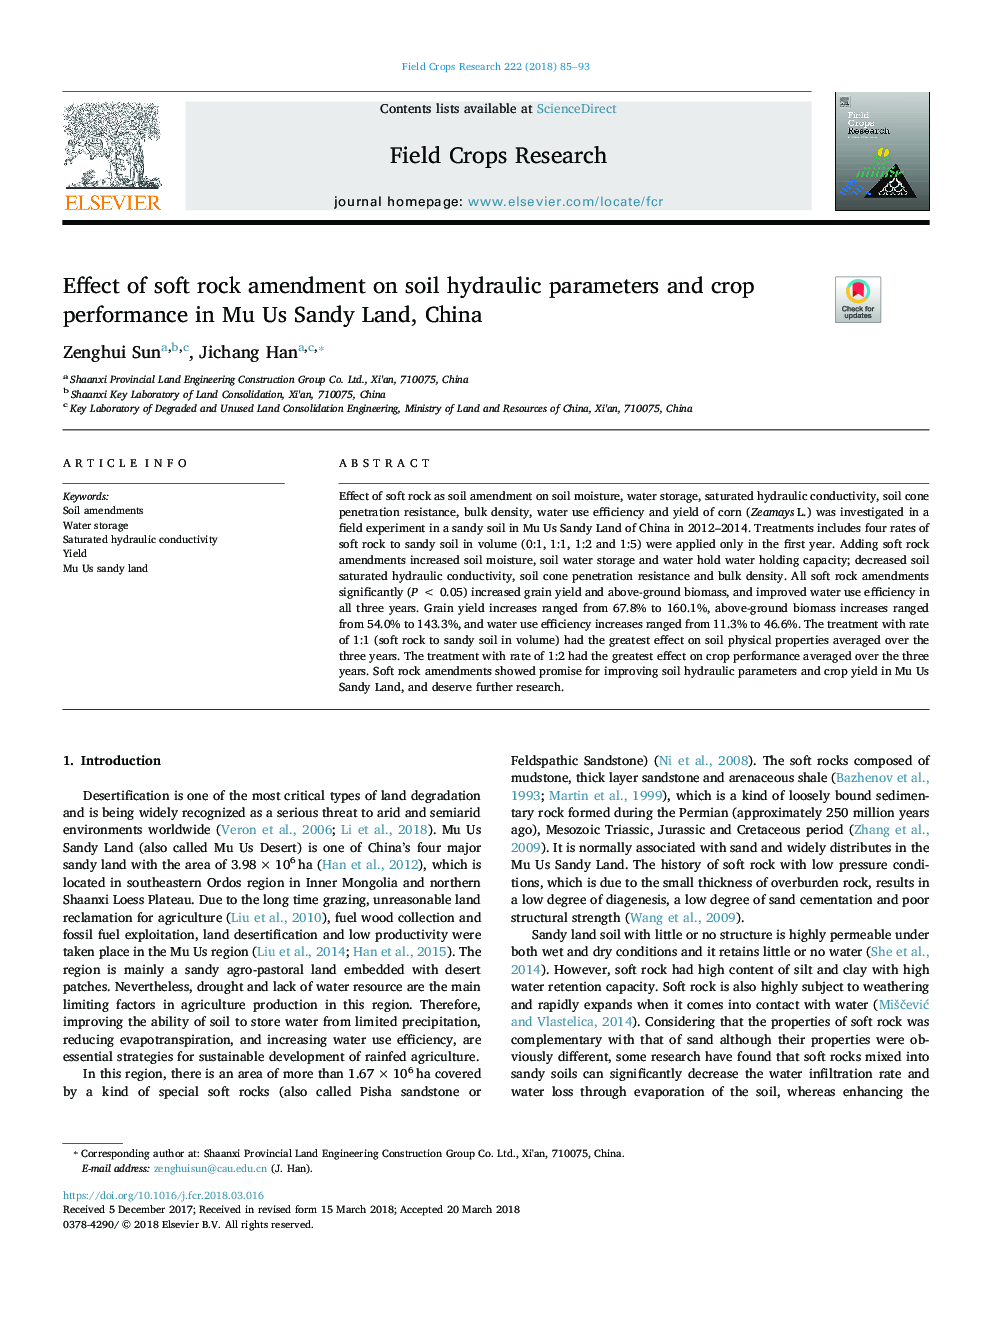 Effect of soft rock amendment on soil hydraulic parameters and crop performance in Mu Us Sandy Land, China